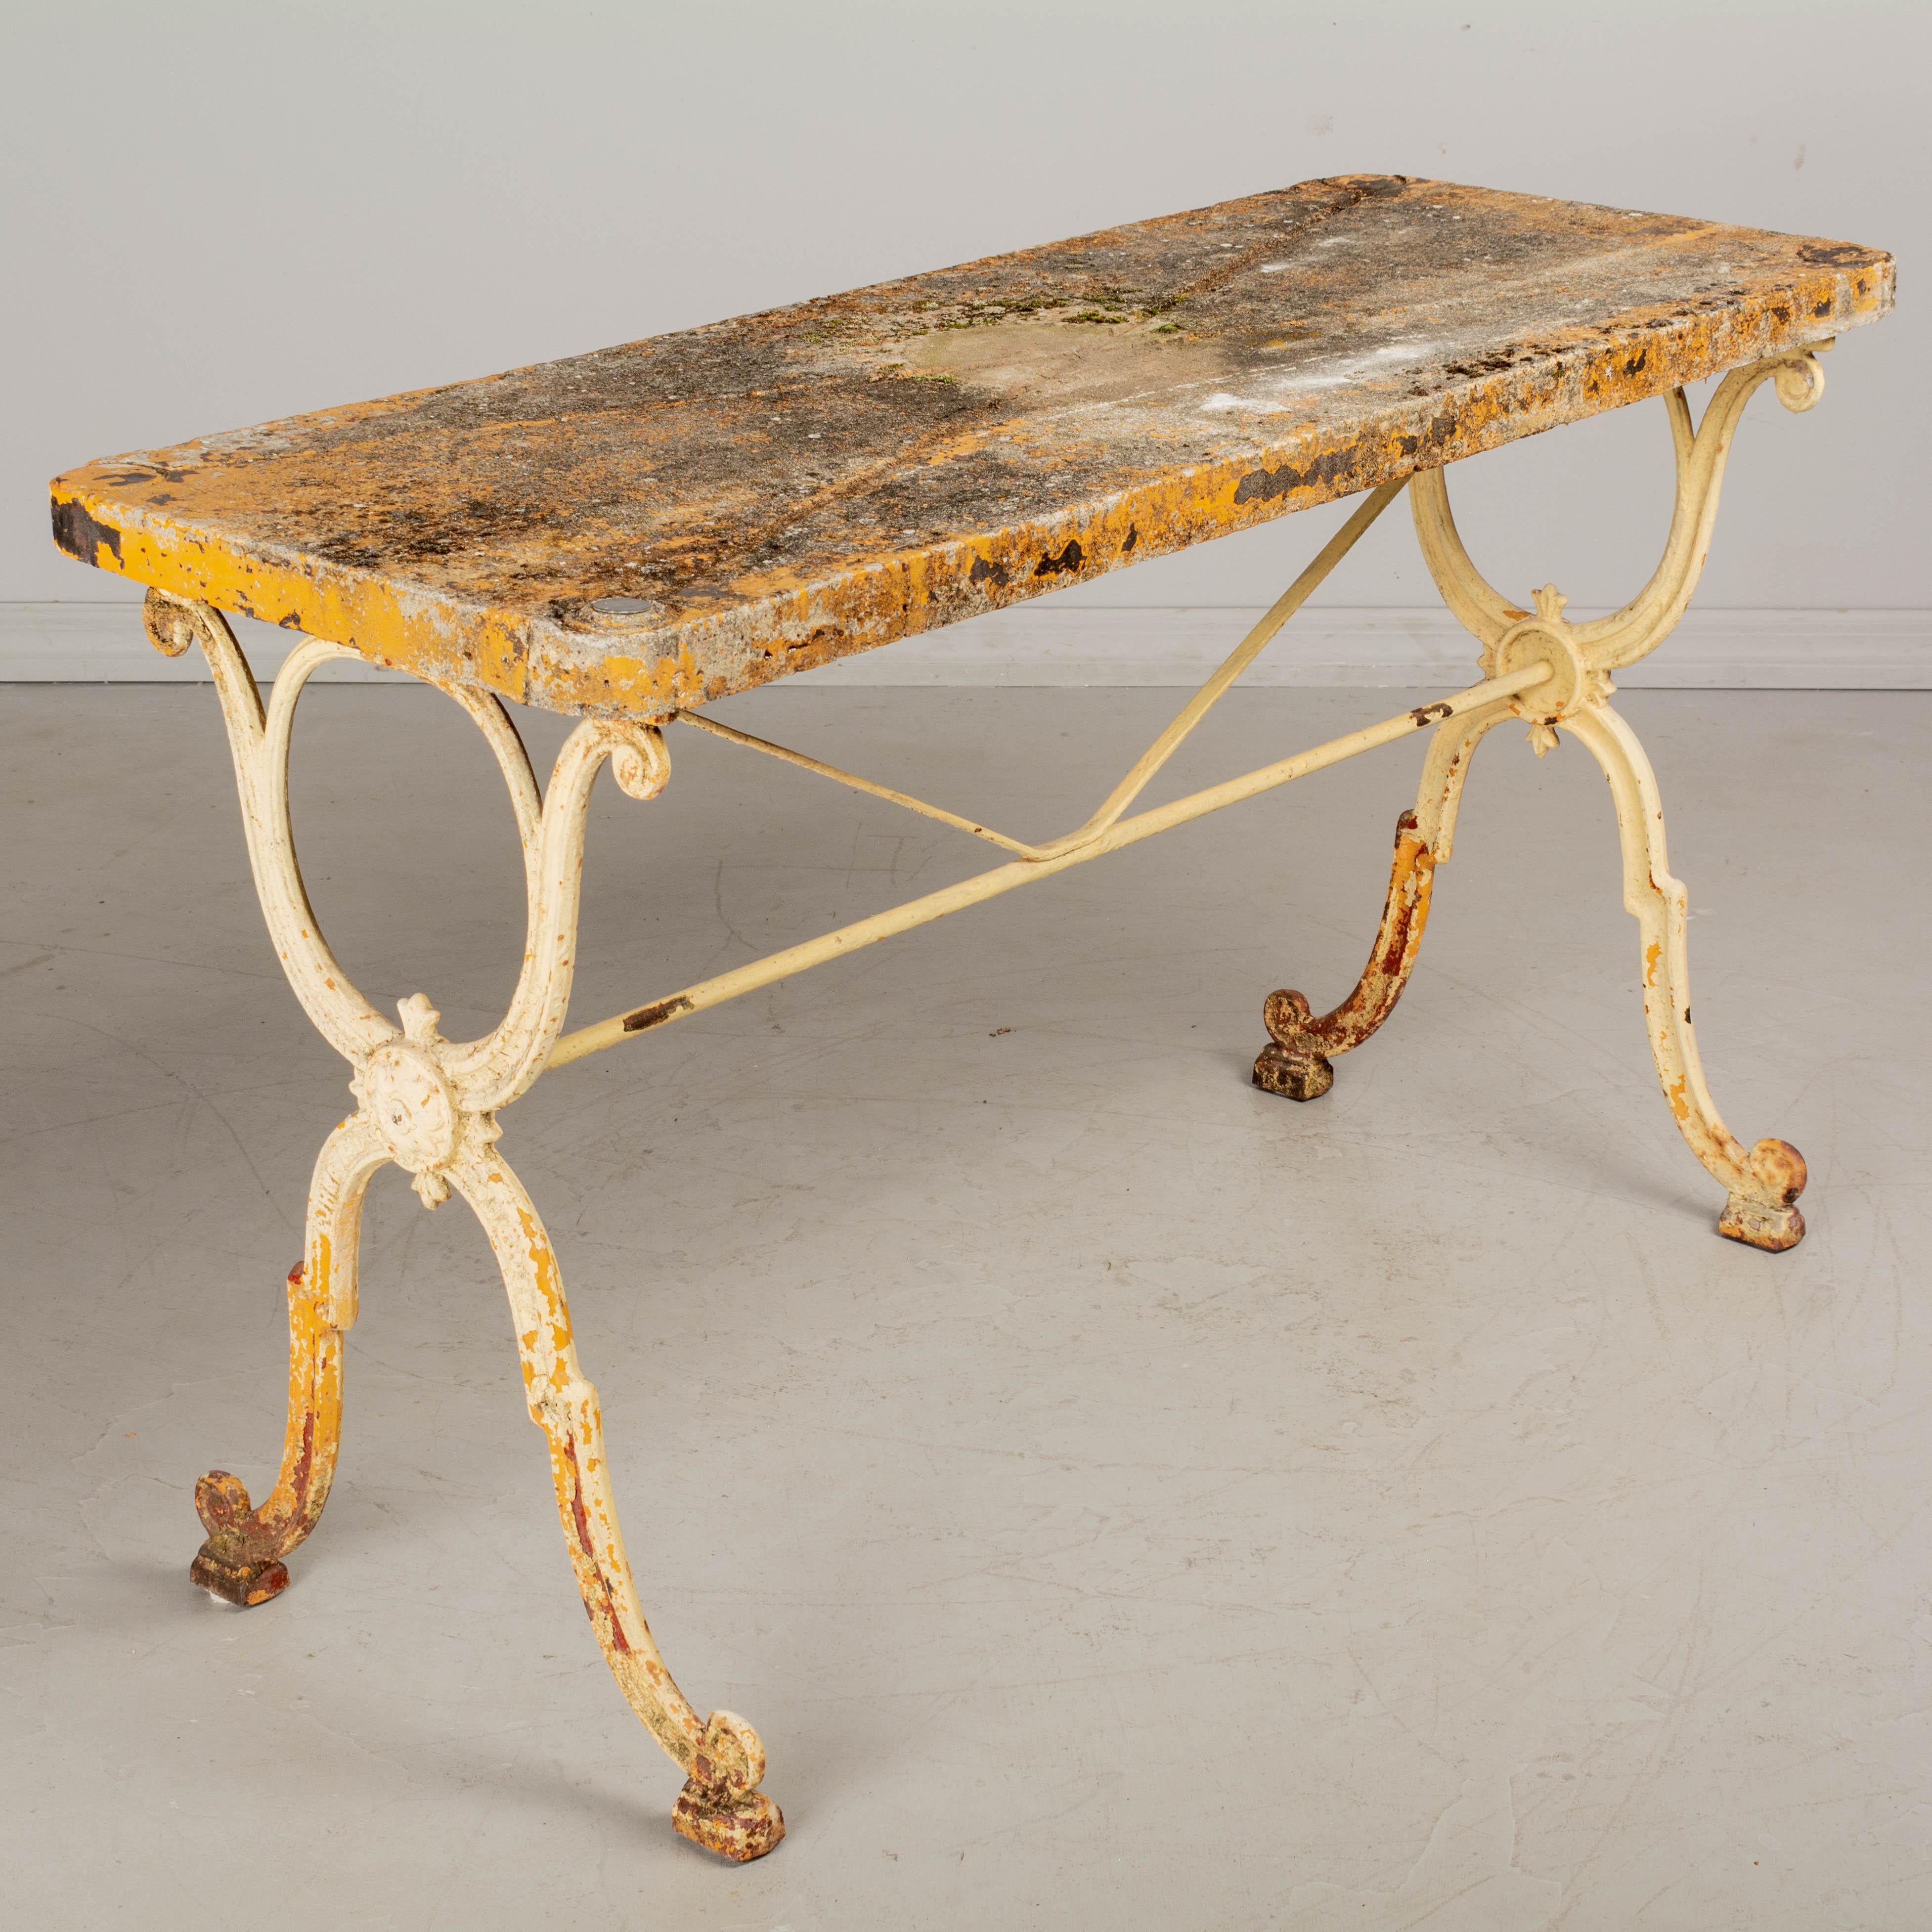 A French cast iron, marble top bistro table, or garden table, with heavy concrete top. The iron base is from the 19th century foundry Corné & Cie in Toulouse and has several layers of peeling red, yellow and white paint. Good quality, heavy casting